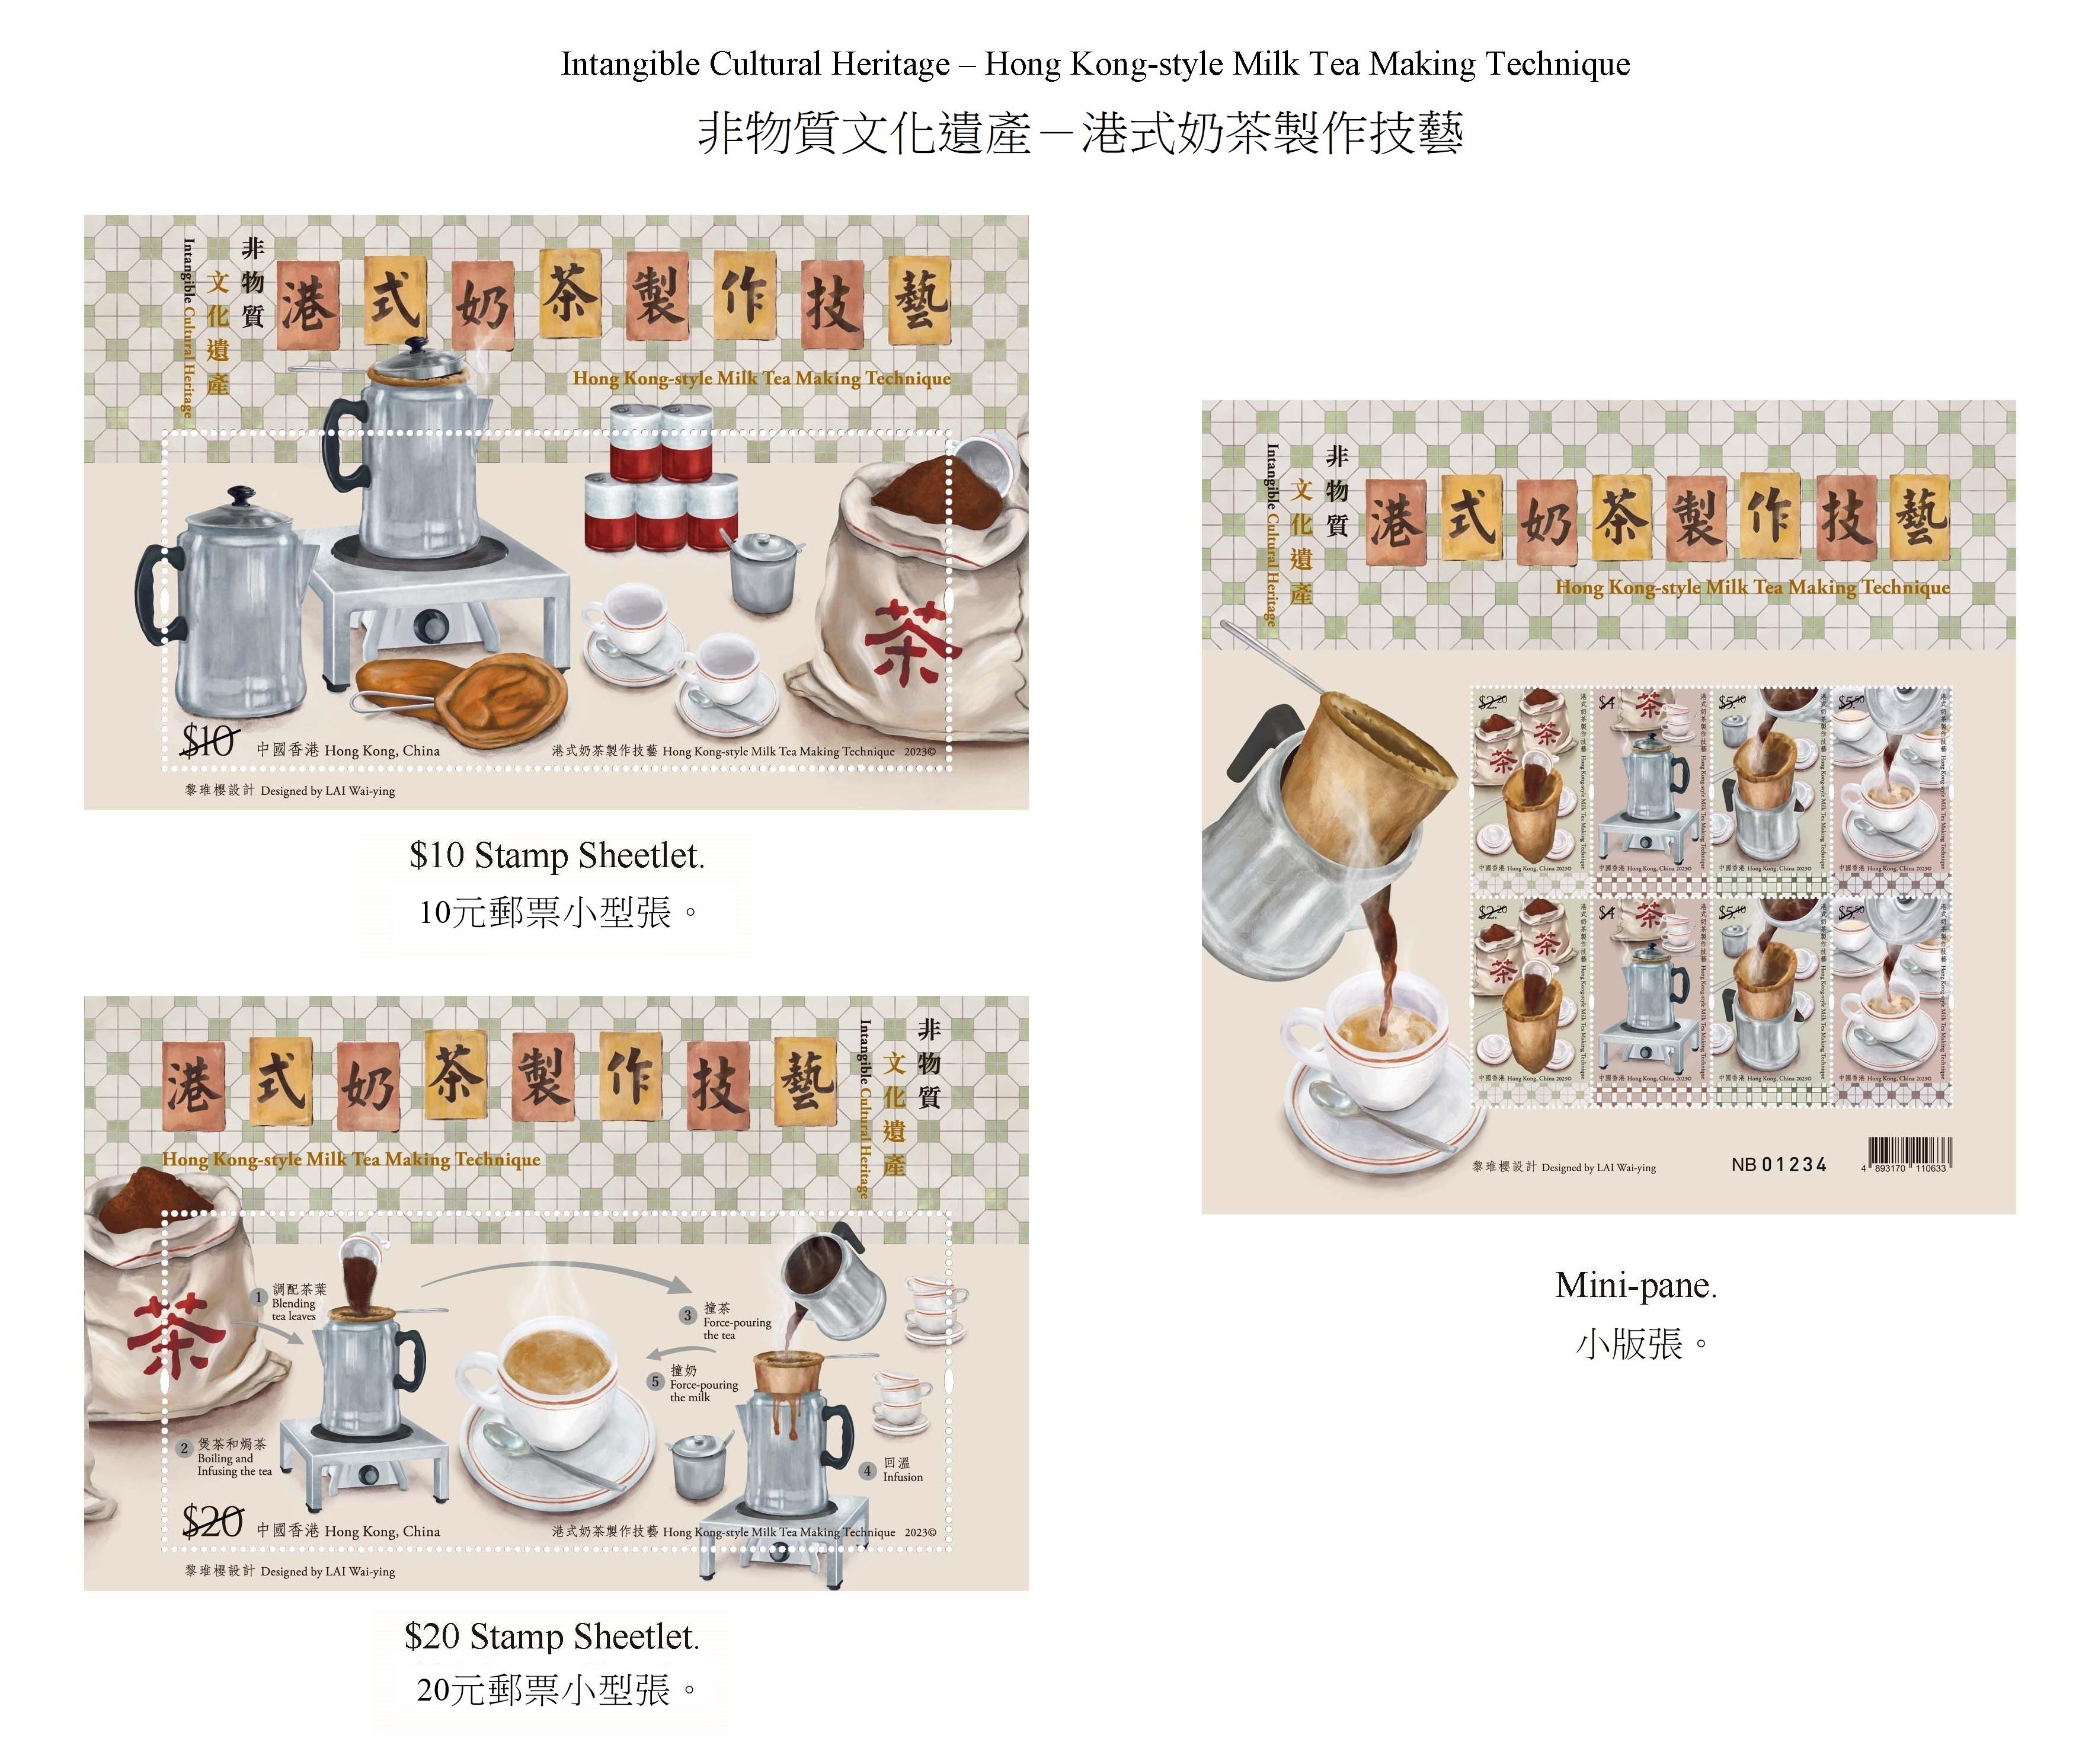 Hongkong Post will launch a special stamp issue and associated philatelic products on the theme of "Intangible Cultural Heritage - Hong Kong-style Milk Tea Making Technique" on July 25 (Tuesday). Photos show the stamp sheetlets and the mini-pane.

